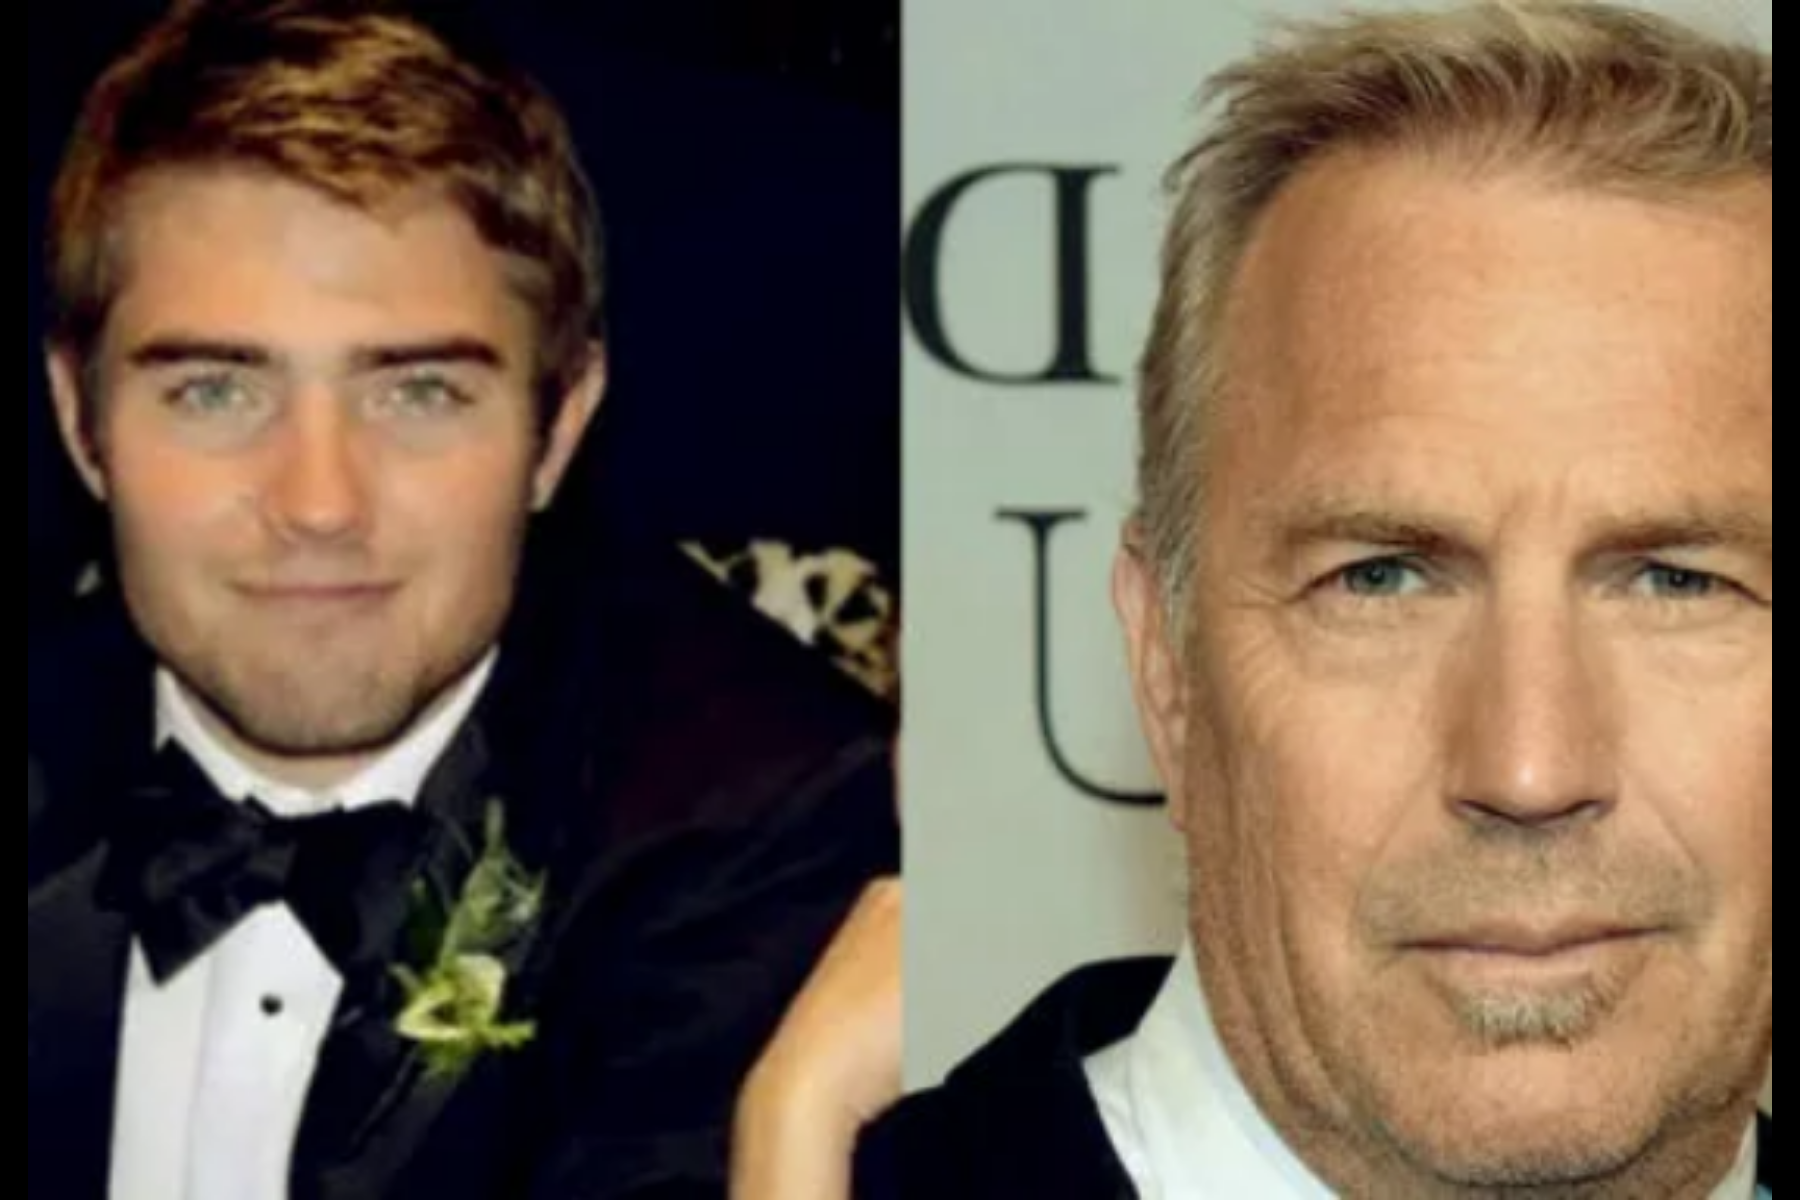 On the left side of the picture, Joe Costner is wearing a tuxedo, while his father, Kevin Costner, is on the right